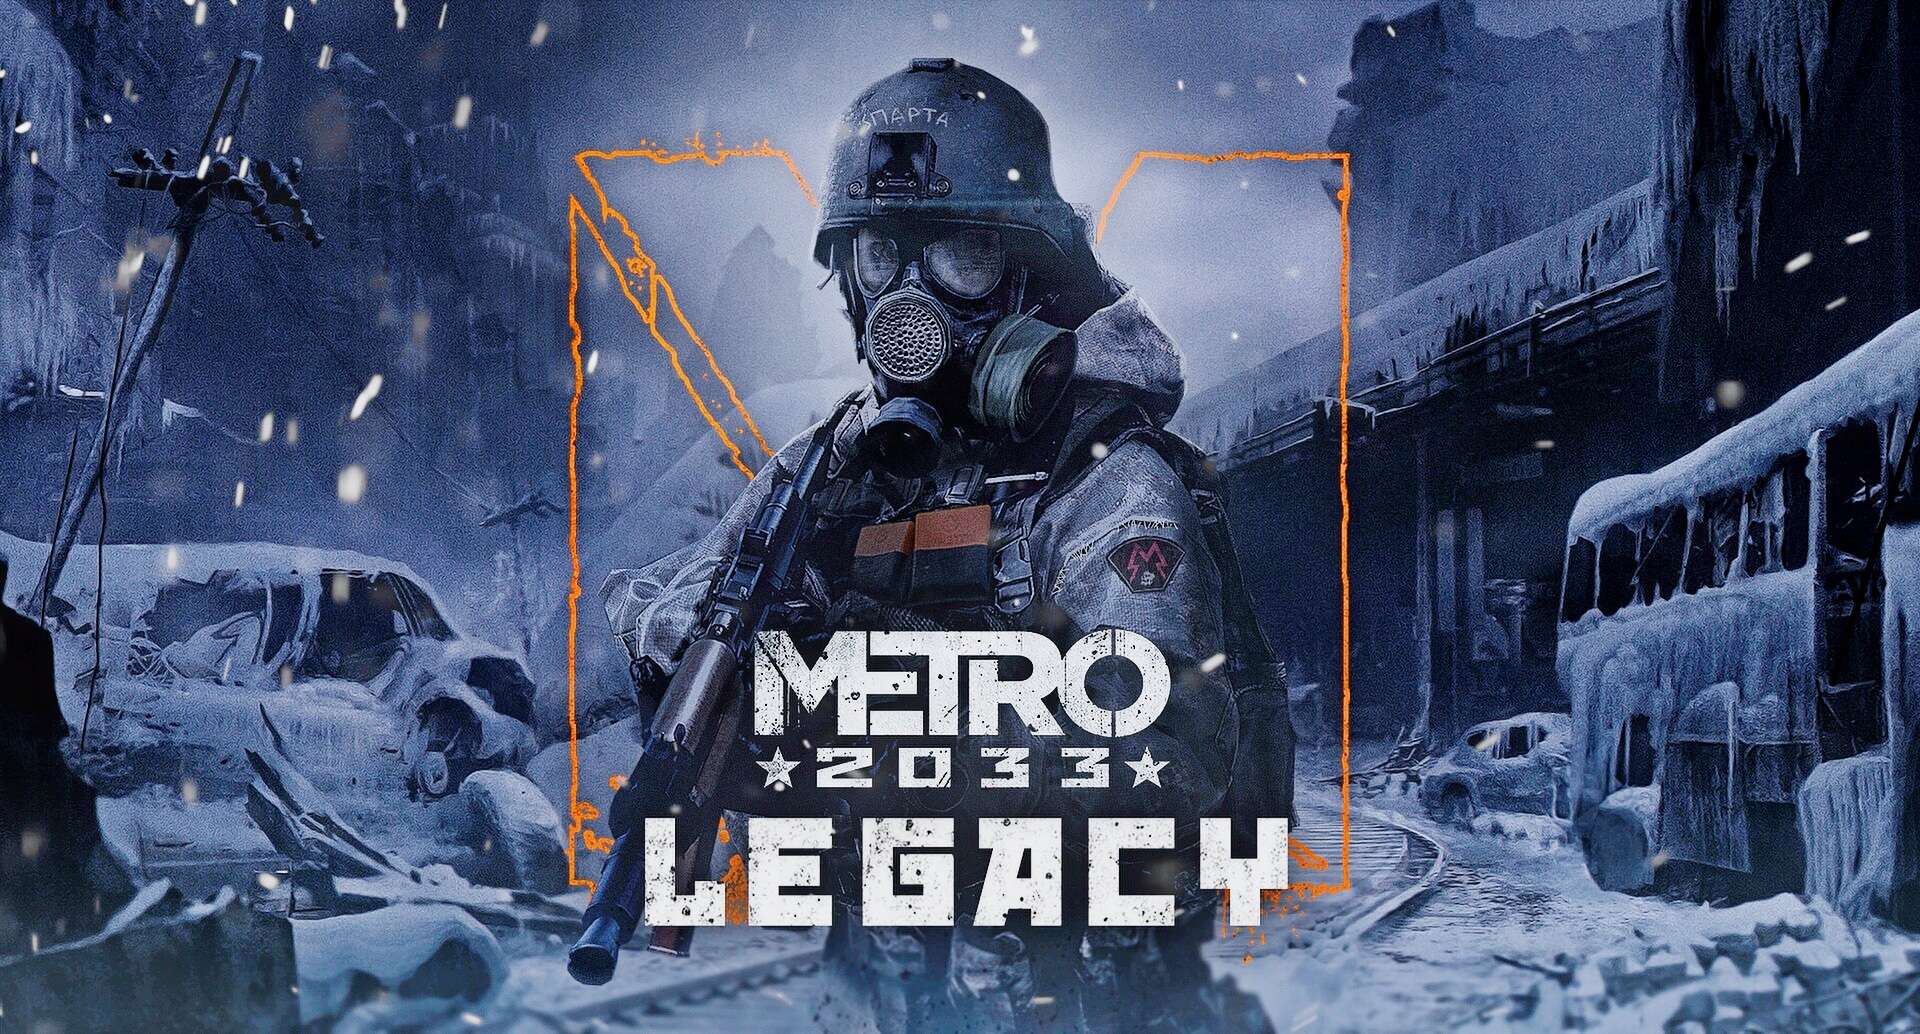 Metro 2033 in steam фото 69